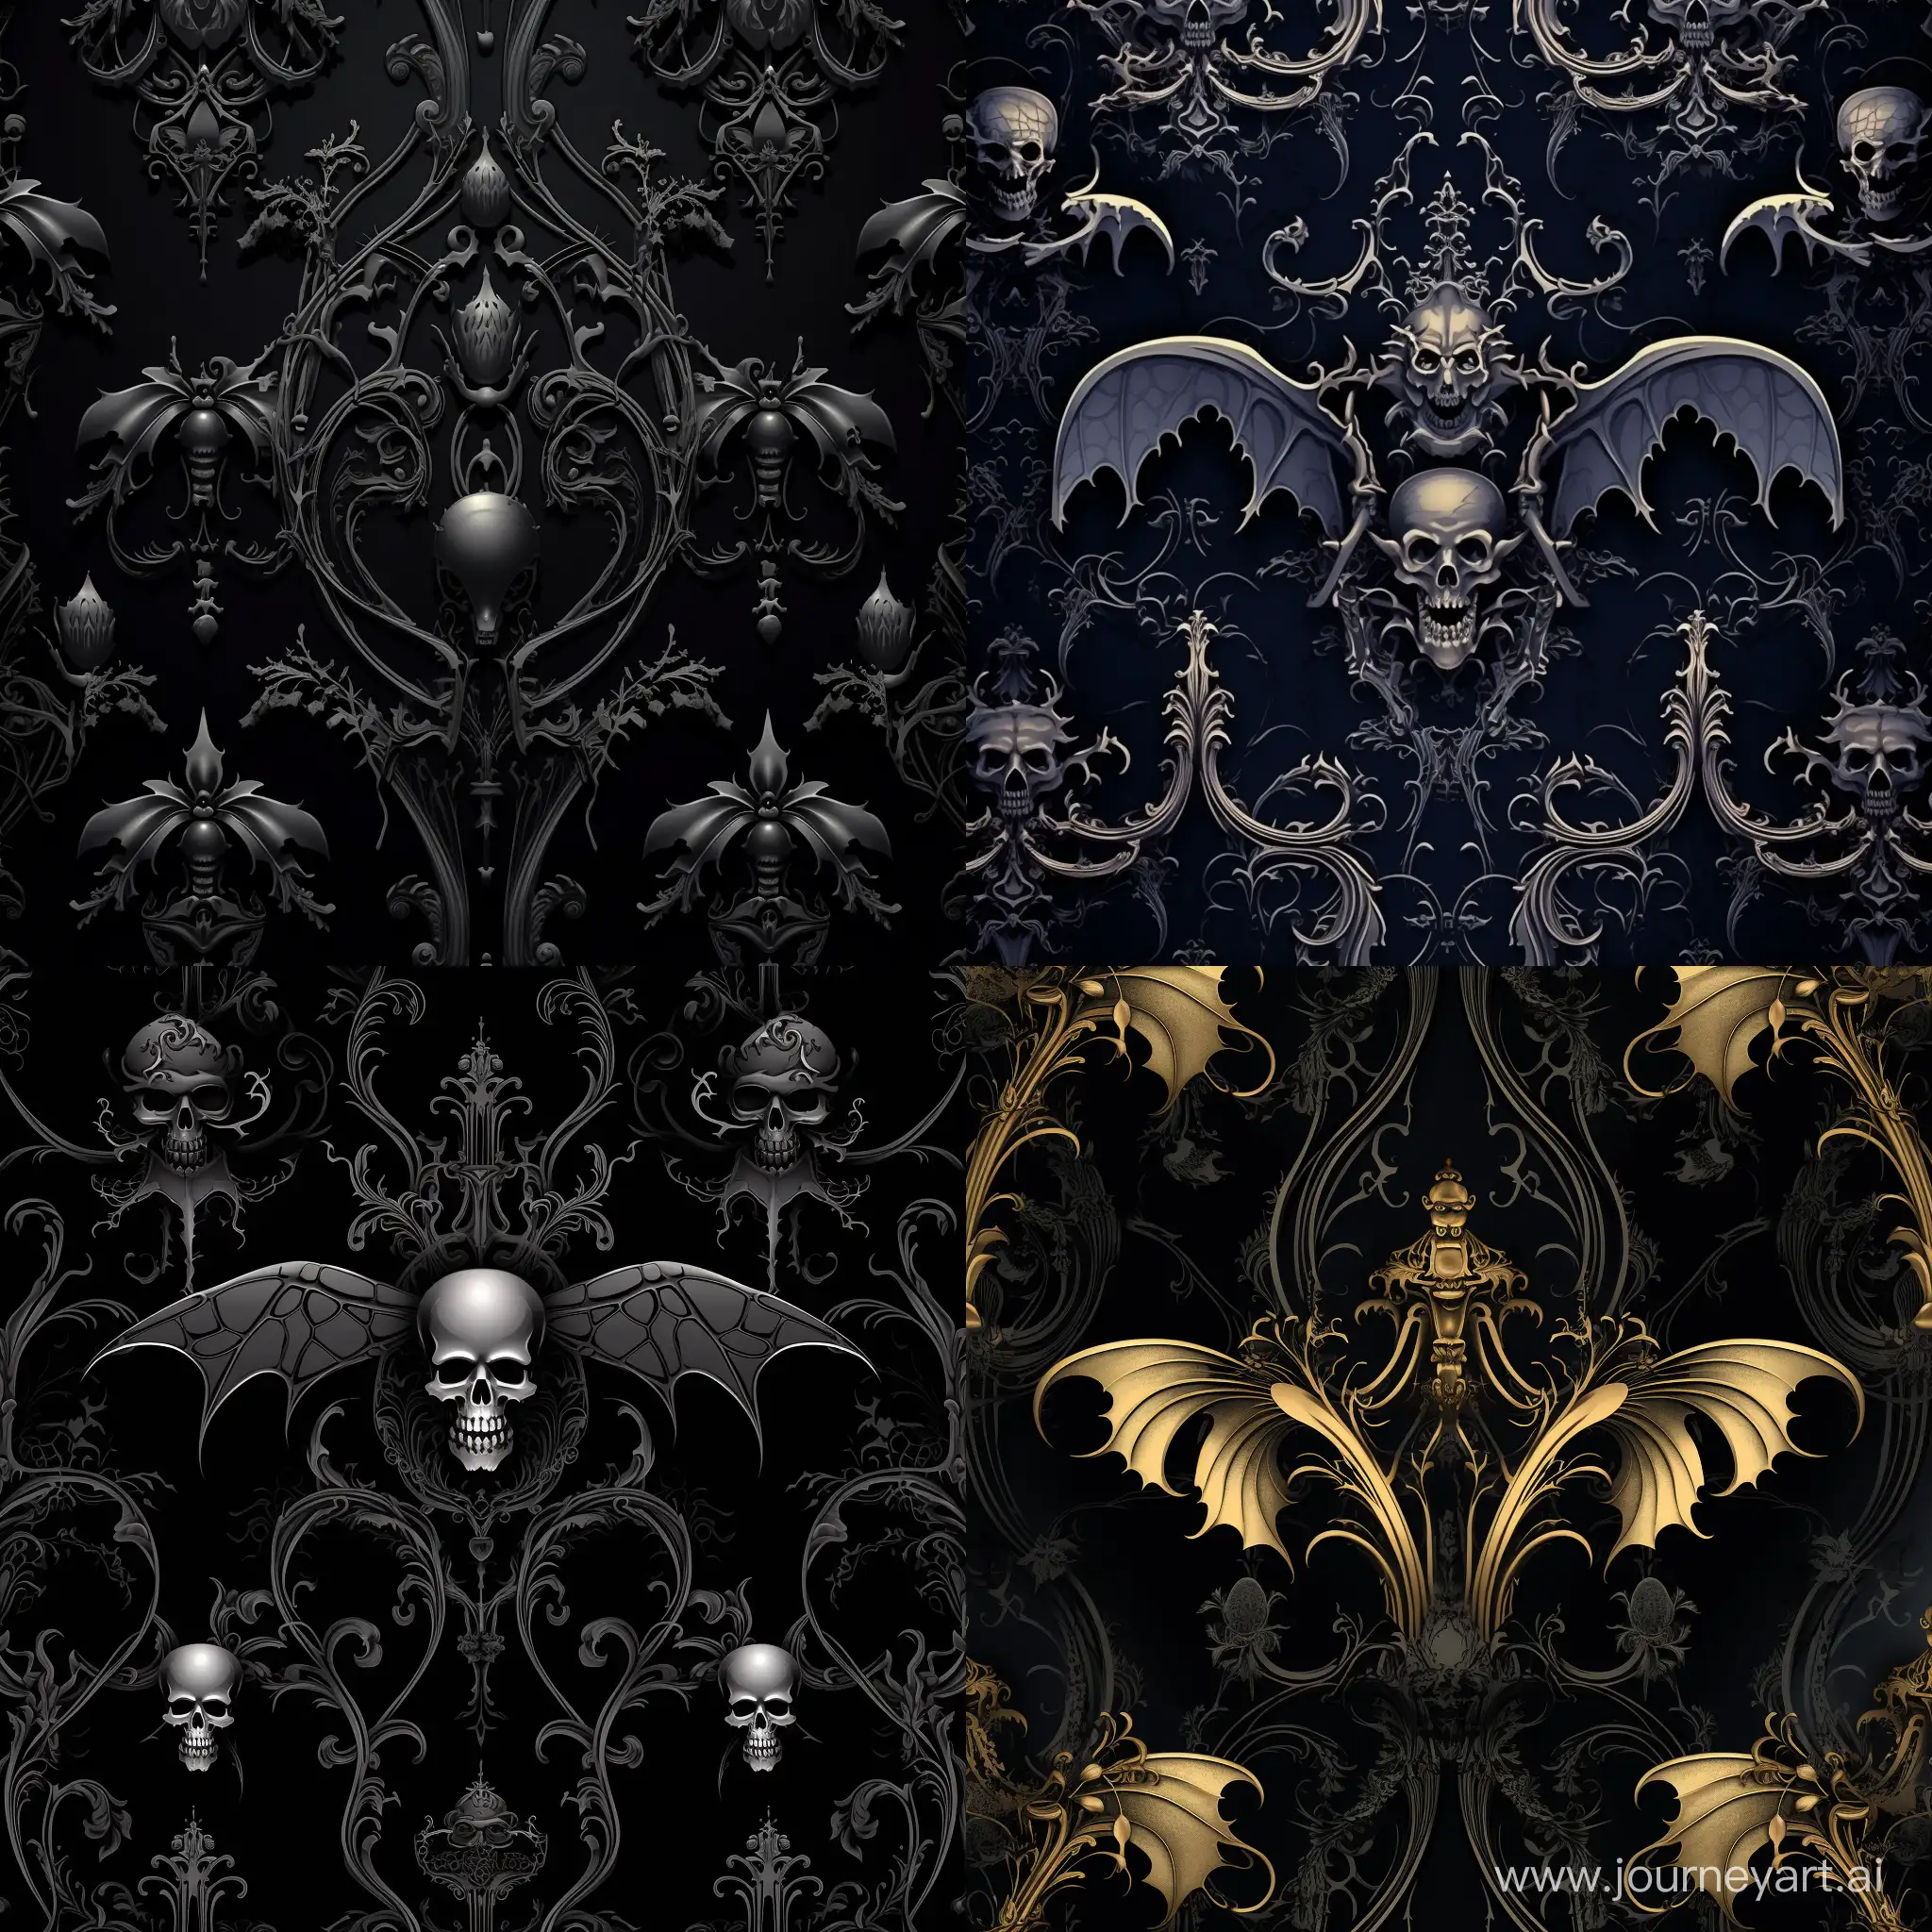 Elegant-Gothic-Victorian-Damask-Pattern-with-Bats-and-Spiders